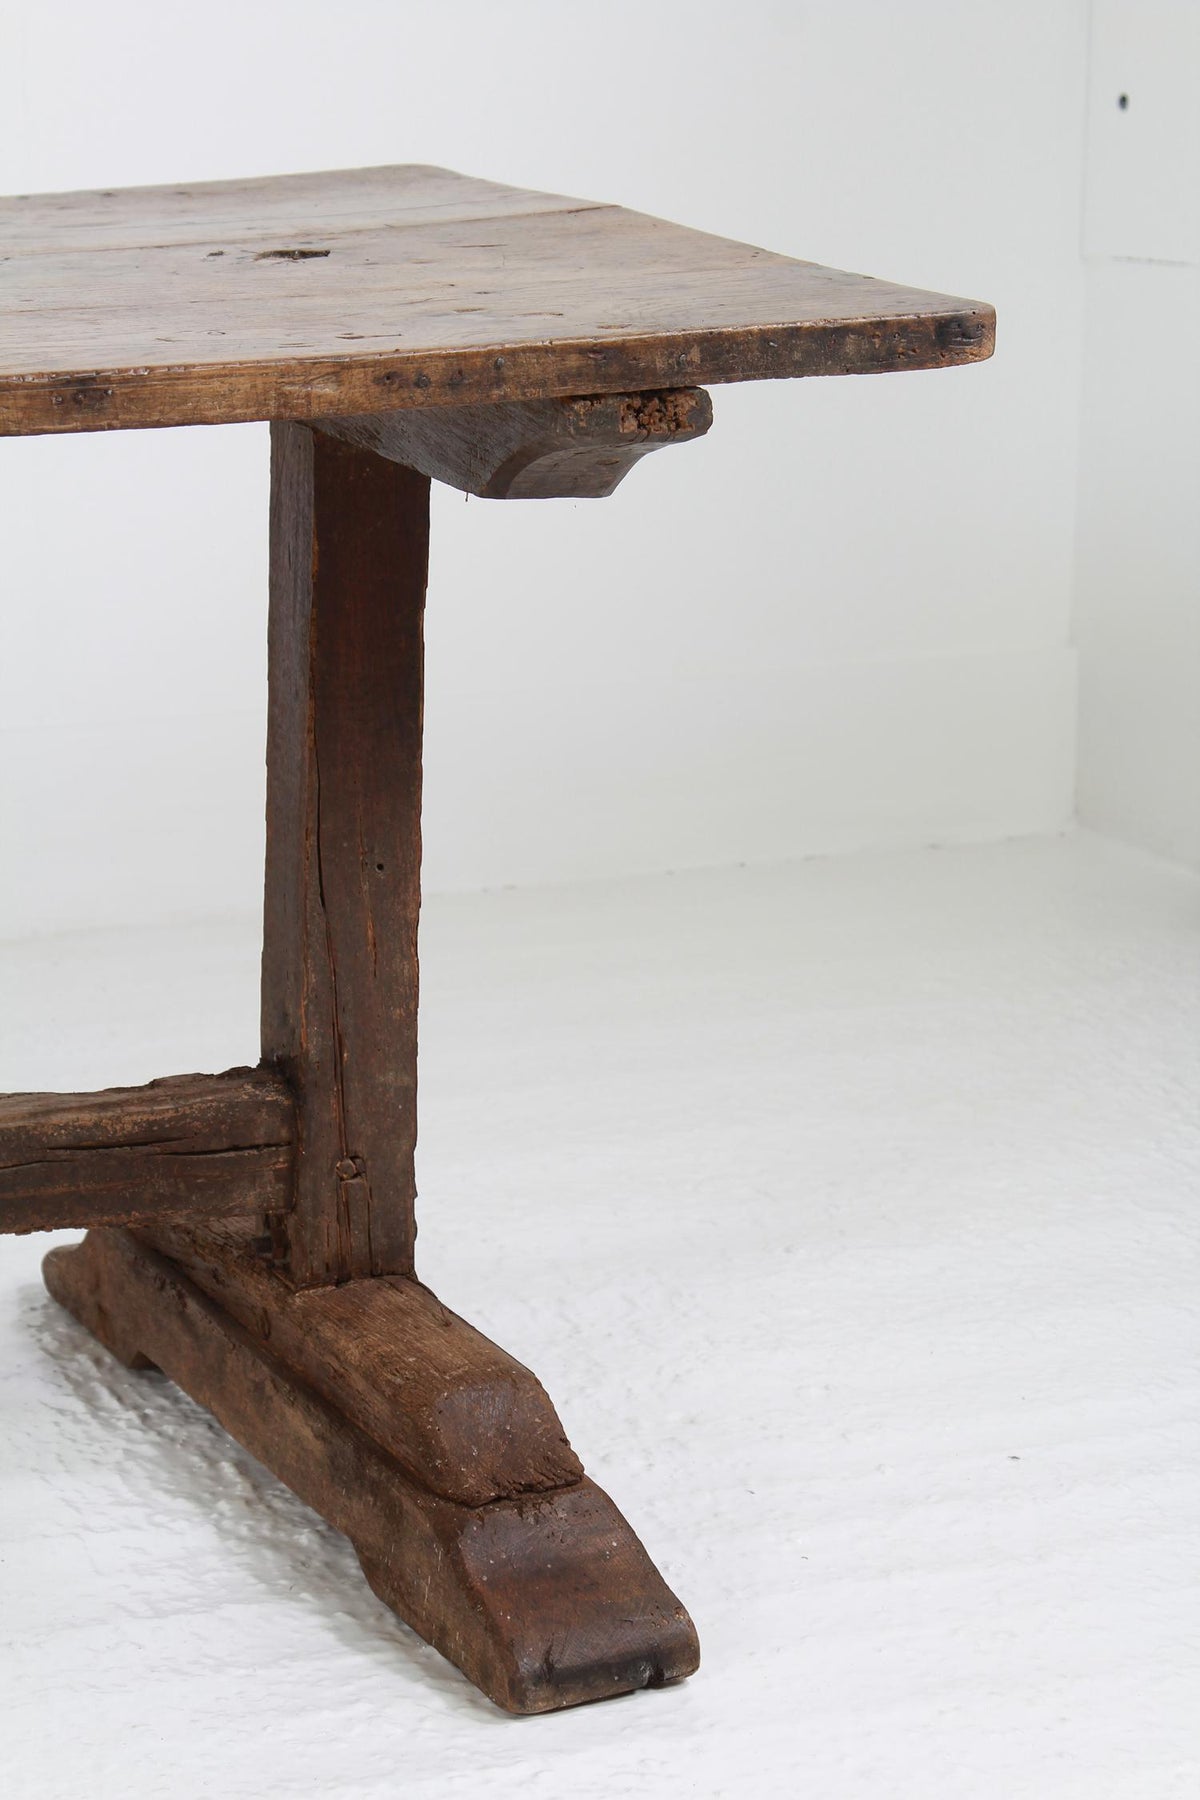 French Early 18thC Primitive Elm Trestle Dining Table